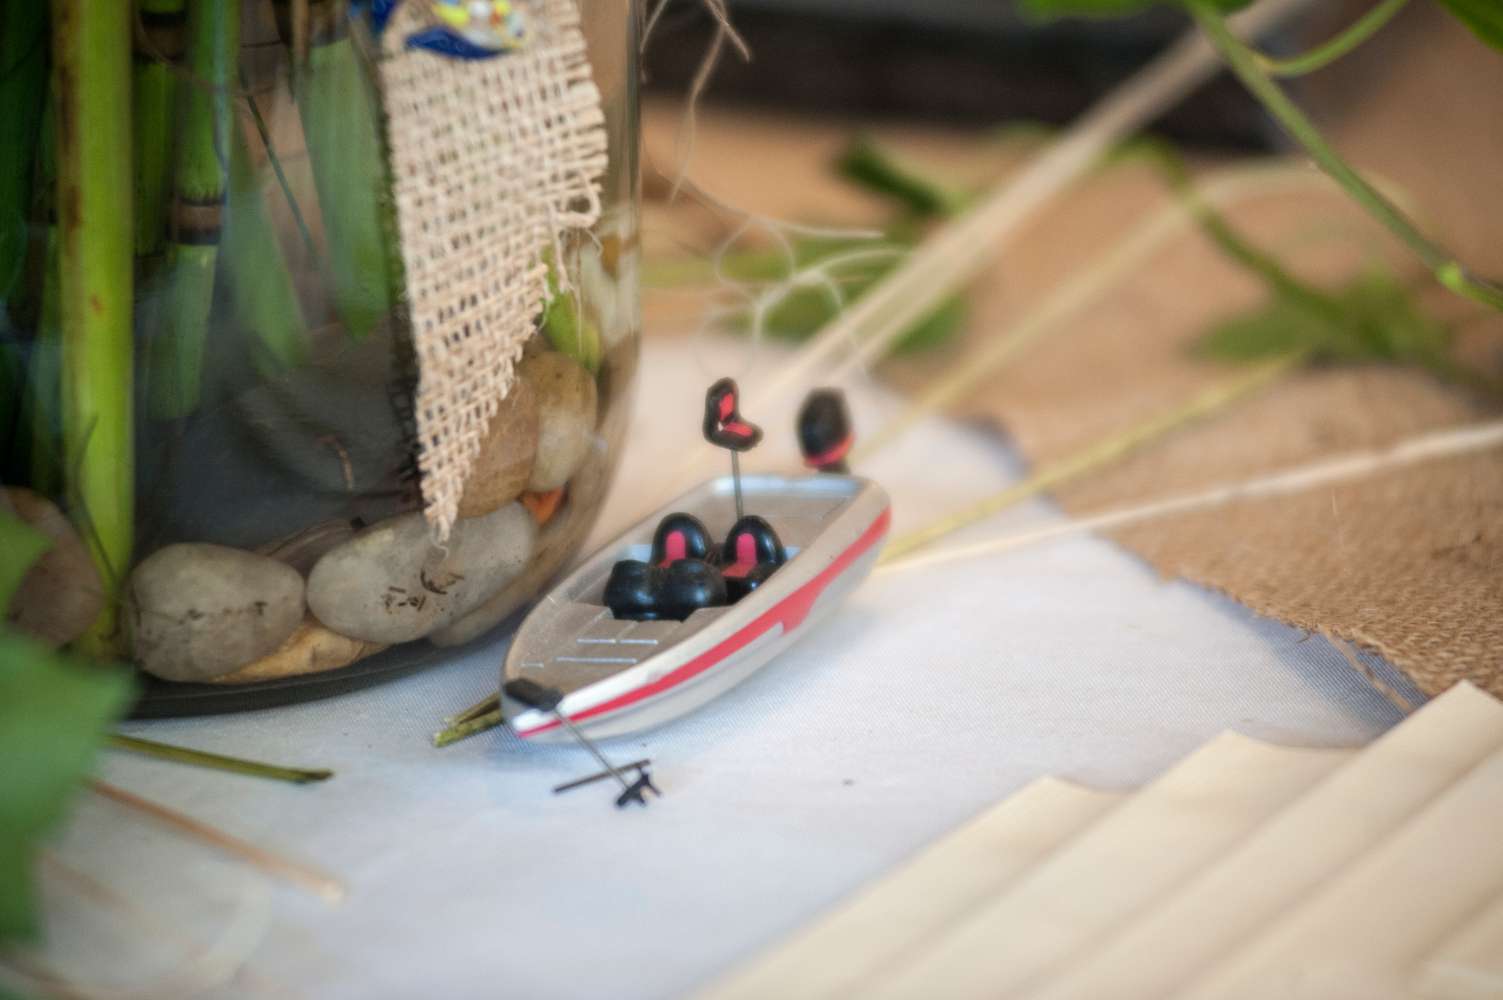 Bass boats adorn the place settings at the tables at Keith and Brandy Poche's Aug. 1 wedding in Natchitoches, La.